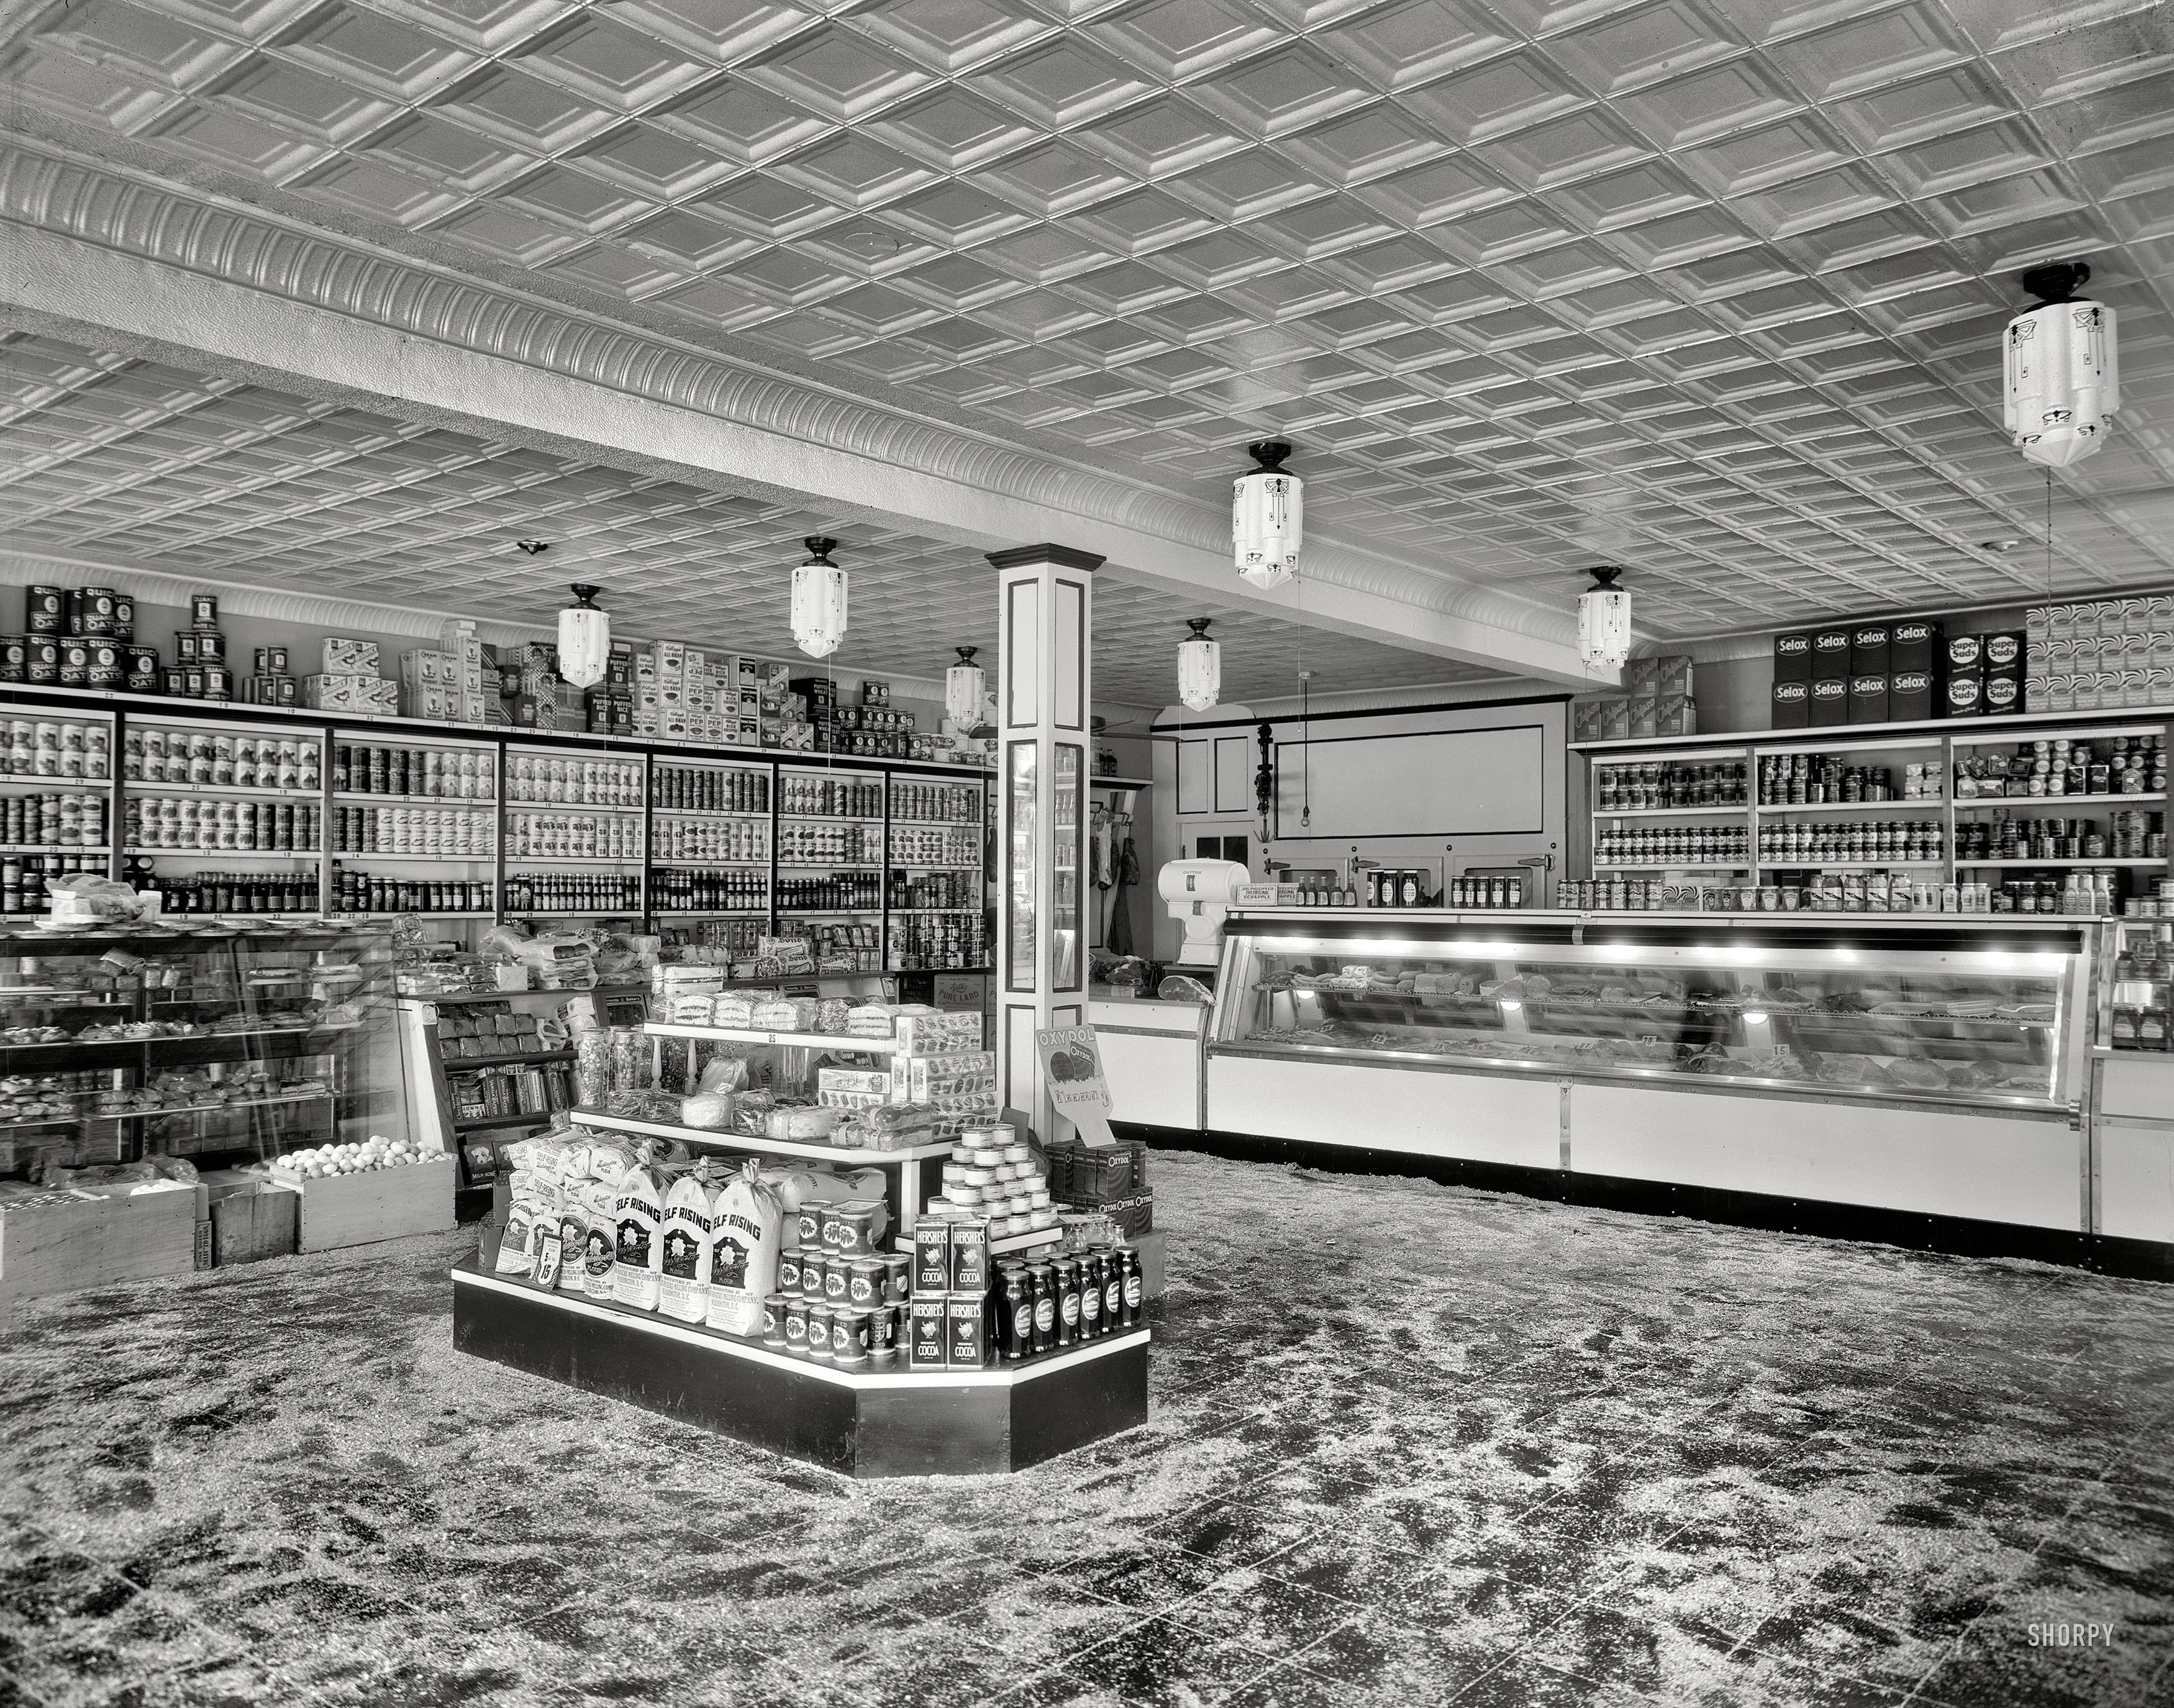 Washington, D.C., circa 1935. "Interior of D.G.S." The District Grocery Store at Seventh and E streets S.W. You'll come for the savings and stay for the sawdust! 8x10 acetate negative, National Photo Company Collection. View full size.